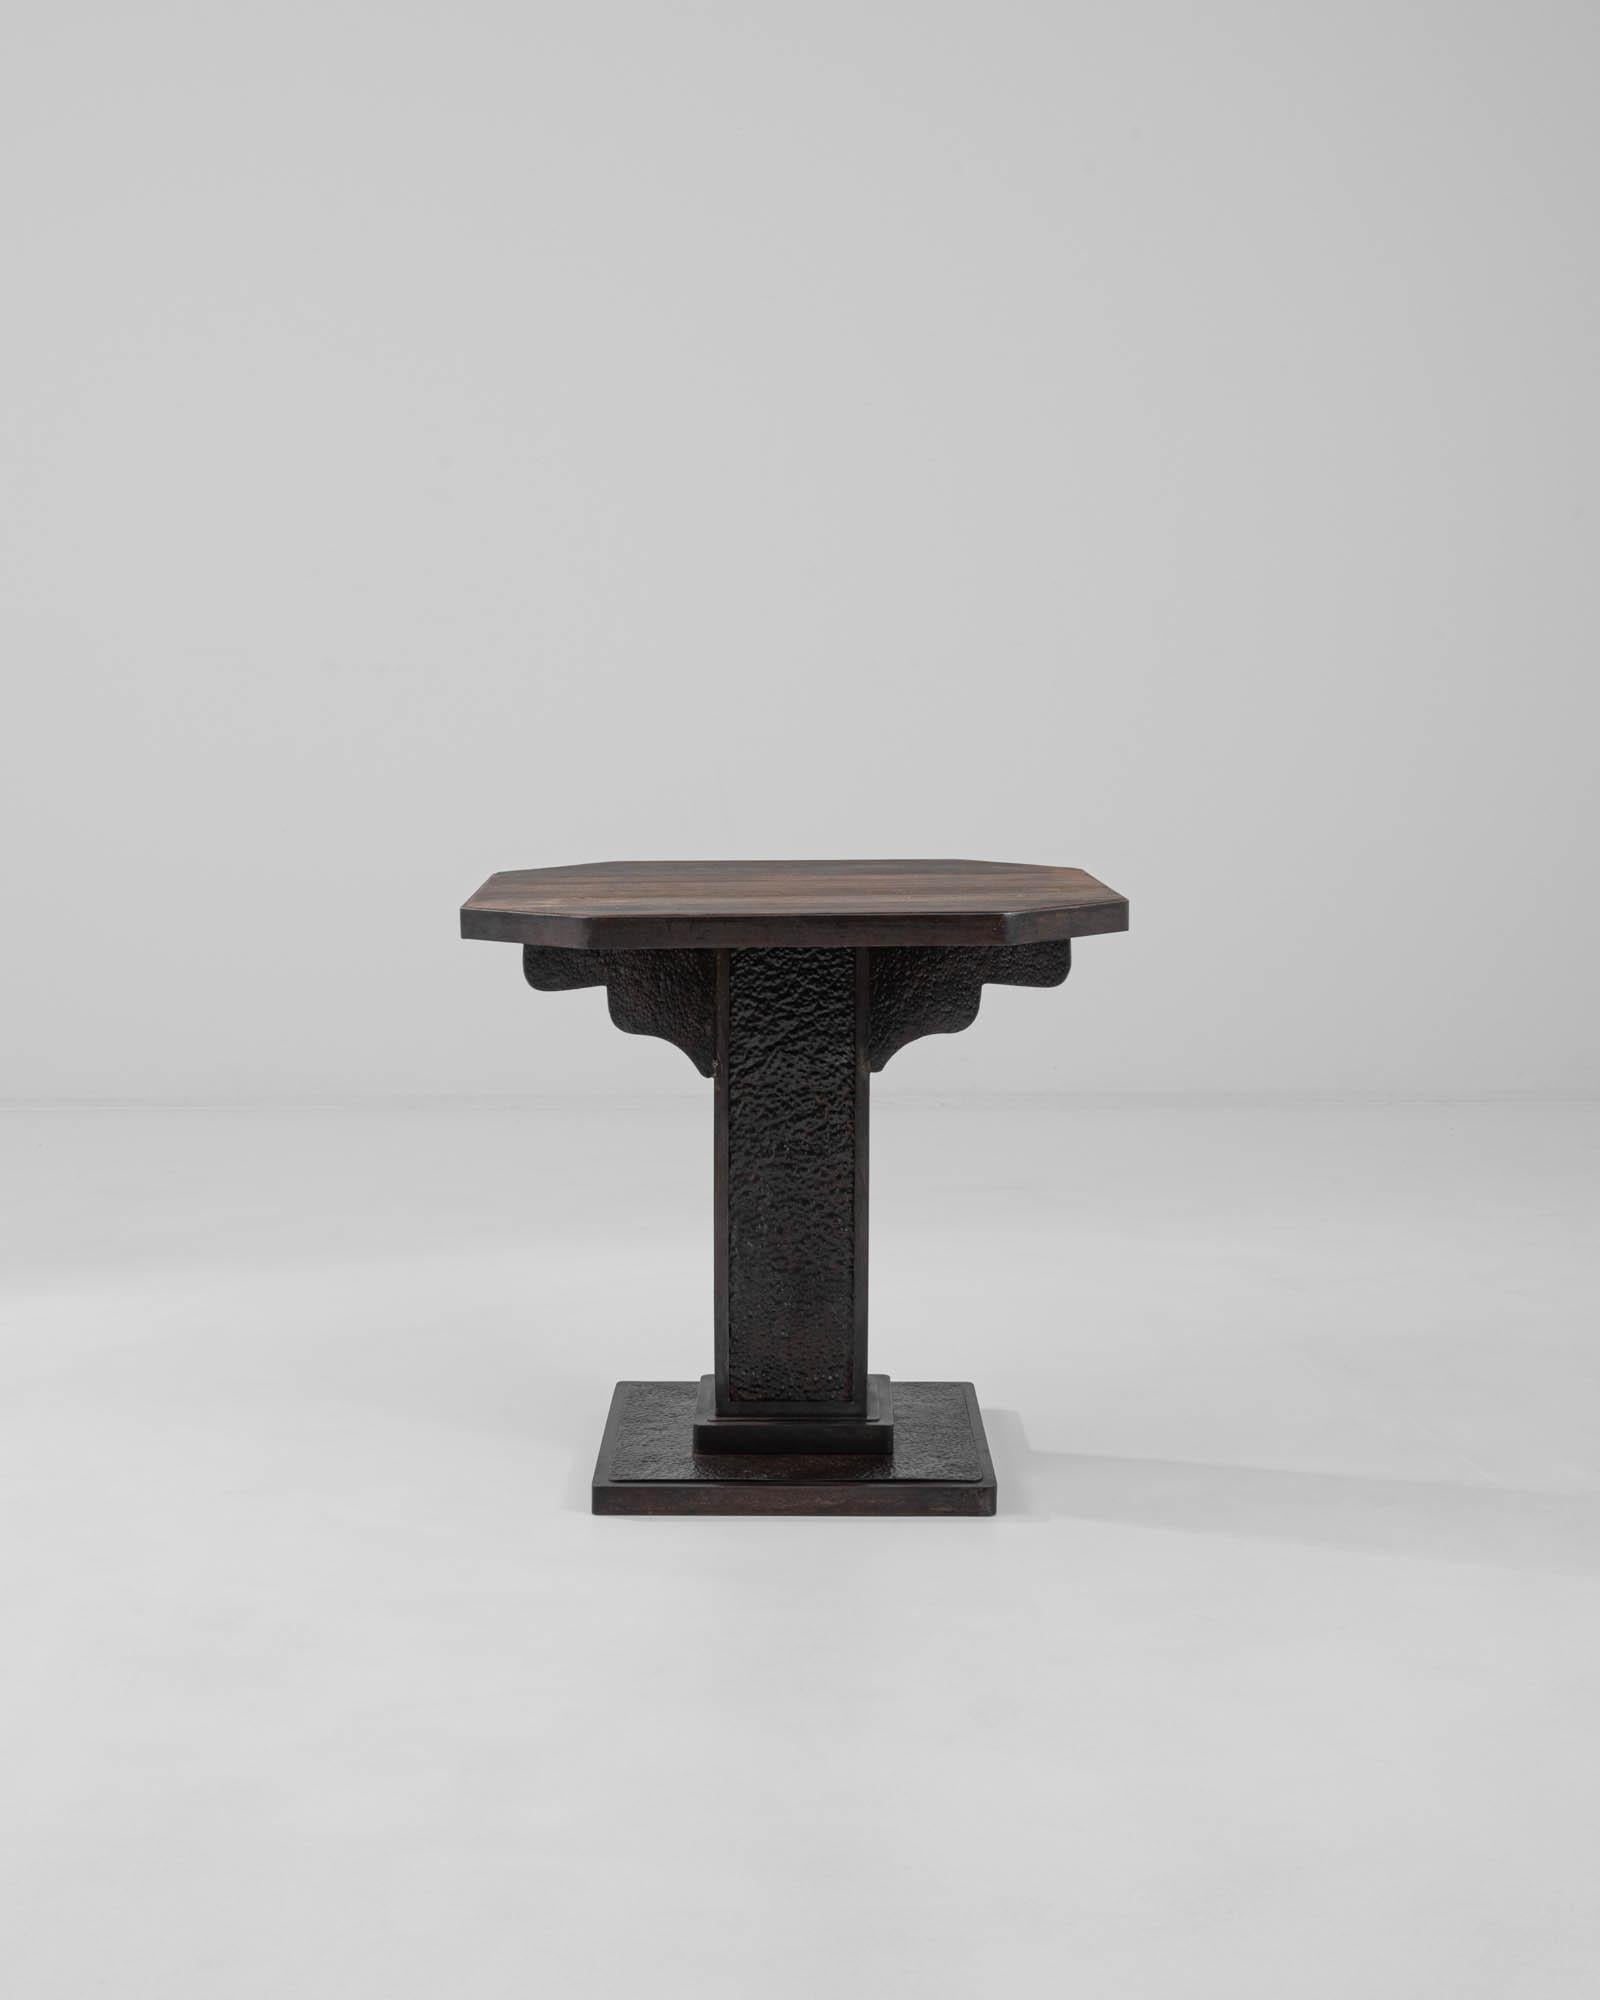 A metal side table with a wooden top made in France, circa 1900. This small gothic-inspired side table carries itself with a unique demeanor, exuding both a moody and sentimental aura through its design and thoughtful choice of materials. The metal